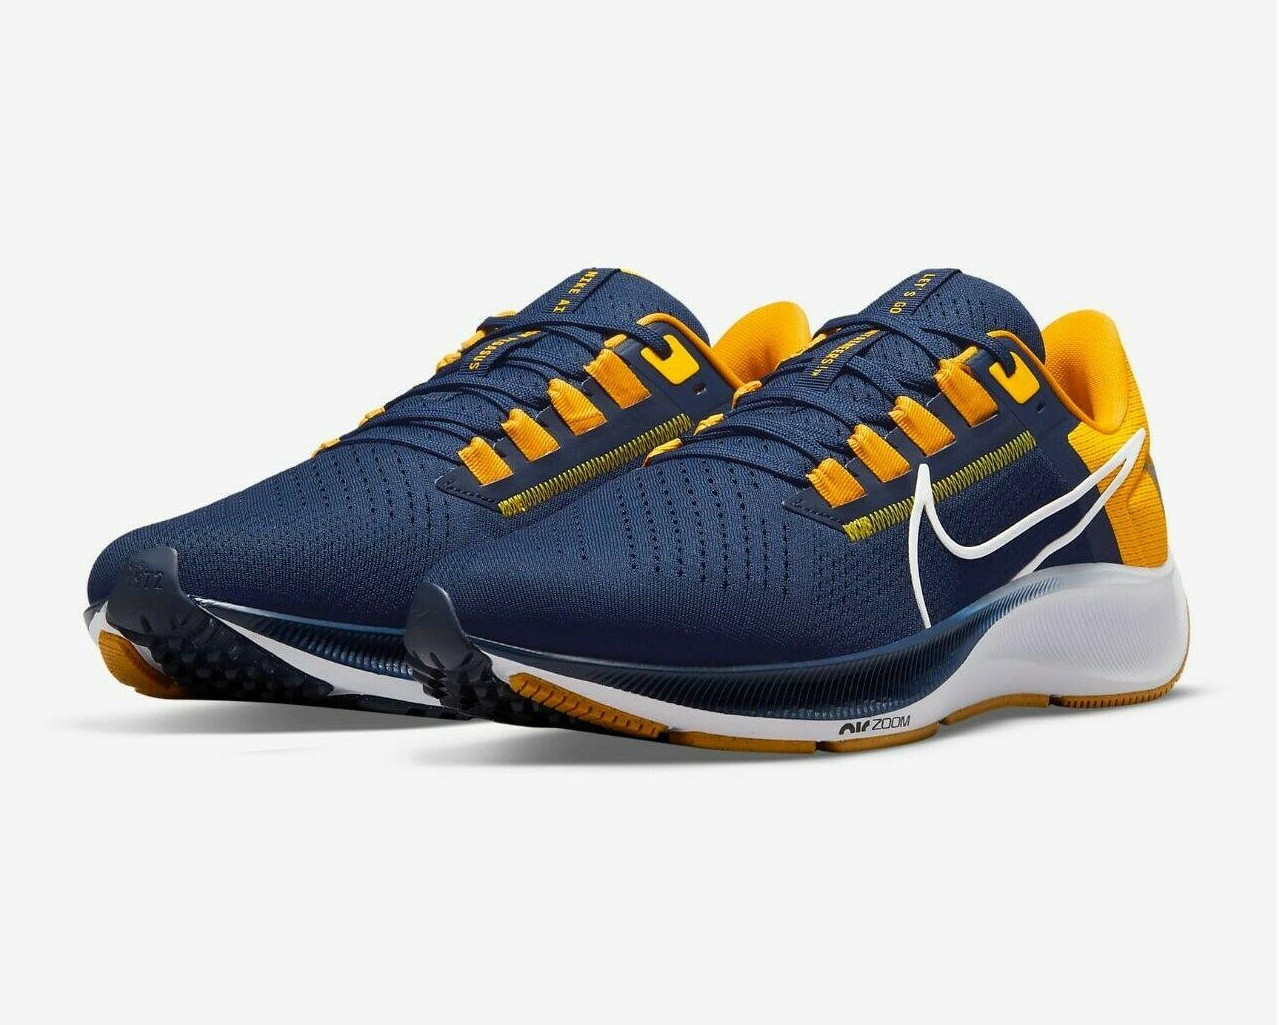 Gama de Limpiar el piso jerarquía kids wearing nike air max 90 infrared - Nike cheap nike and under armour shoes  West Virginia College Navy University Gold White DJ0864 - 400 - GmarShops